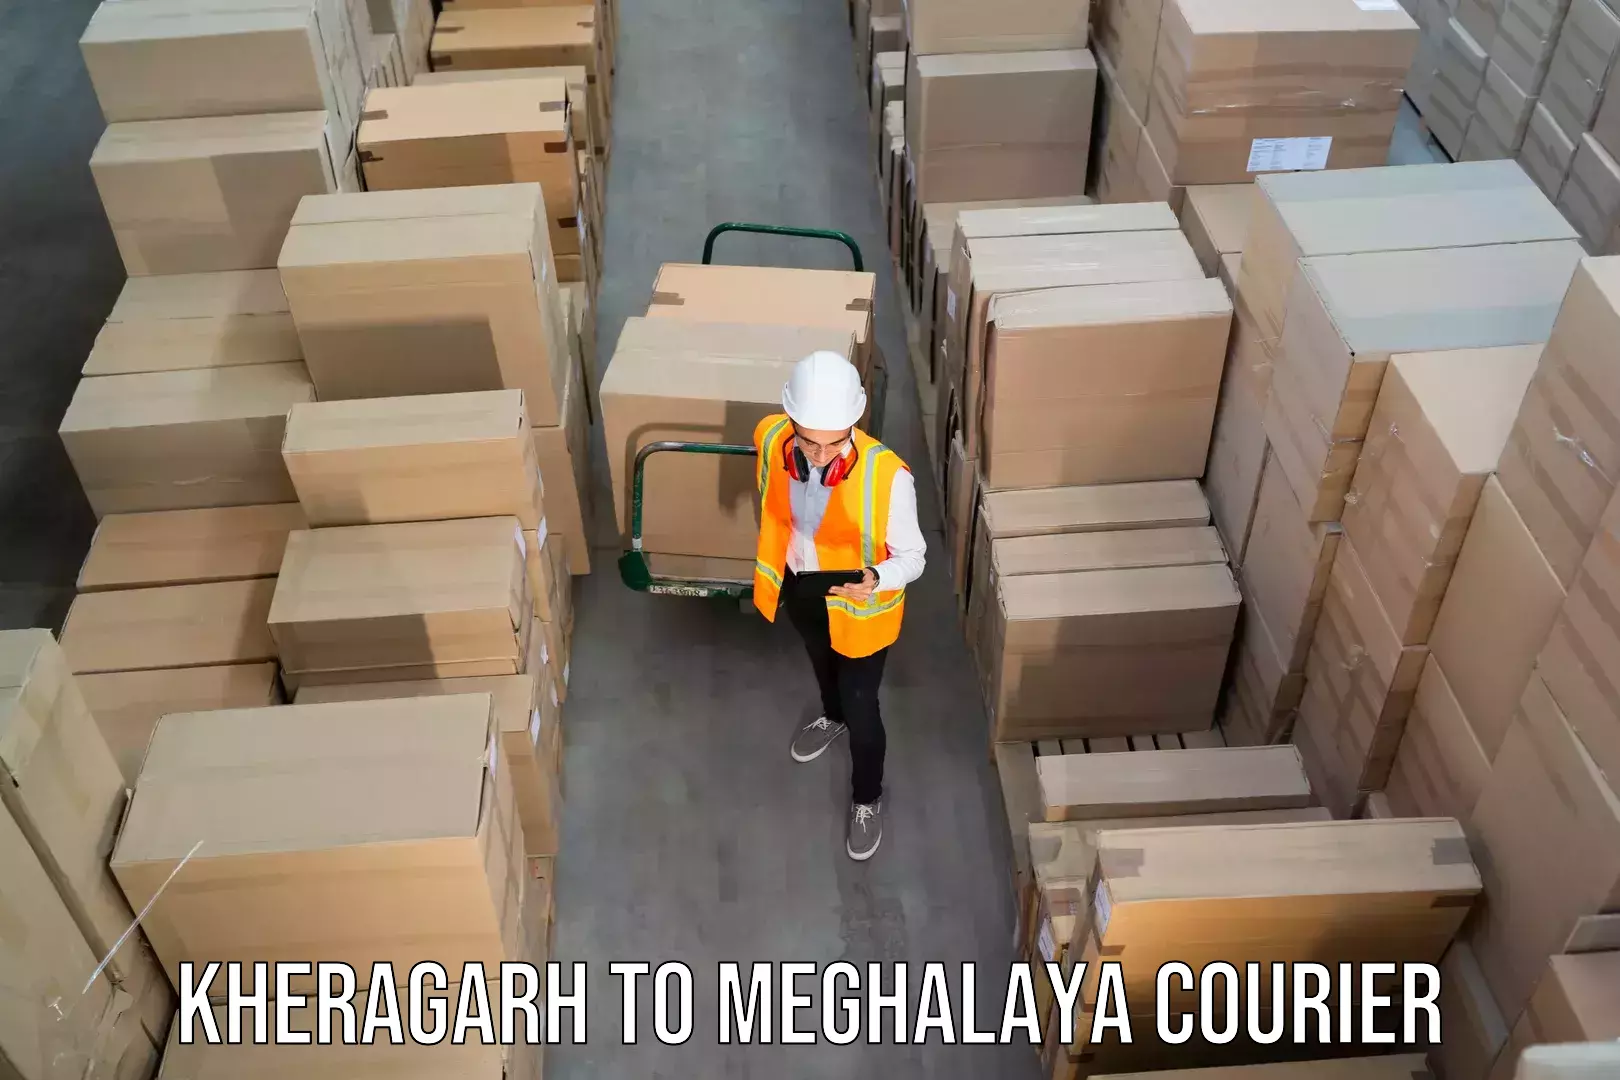 Subscription-based courier Kheragarh to Jowai